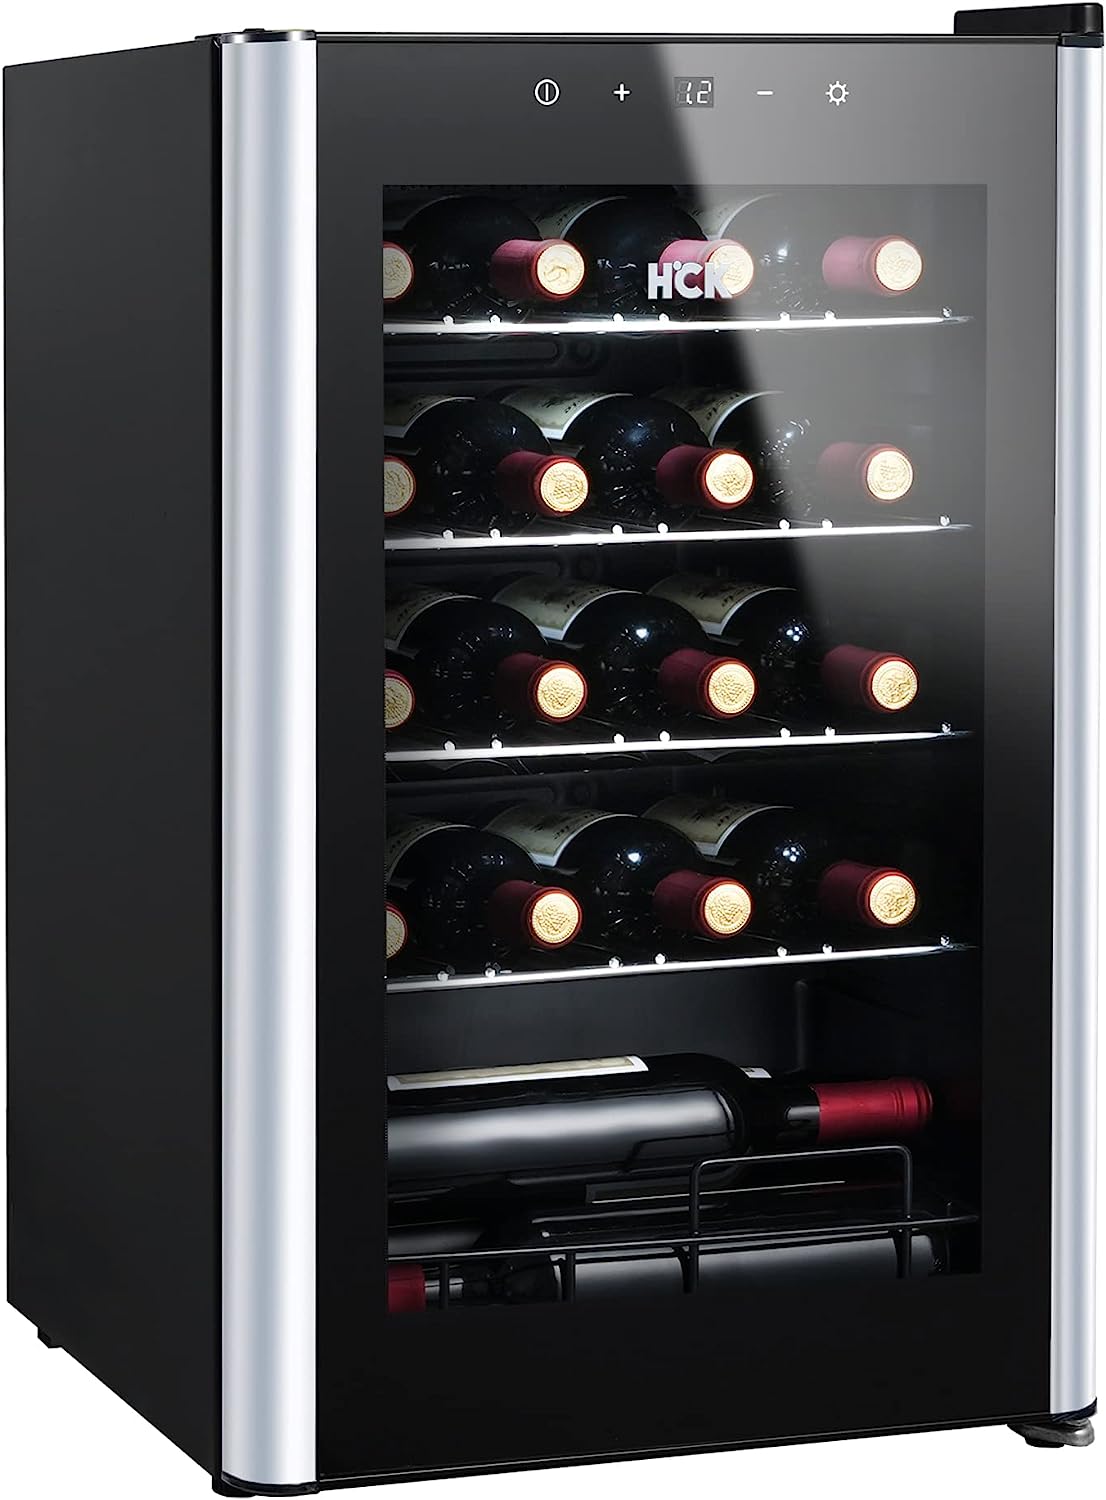 HCK Wine Refrigerator, Wine Refrigerators 24 Bottles, 70 Litres, Single Cooling Zone 4-22°C, Small Wine Fridge with Glass Door, Full Glass Touch Panel Design, Black